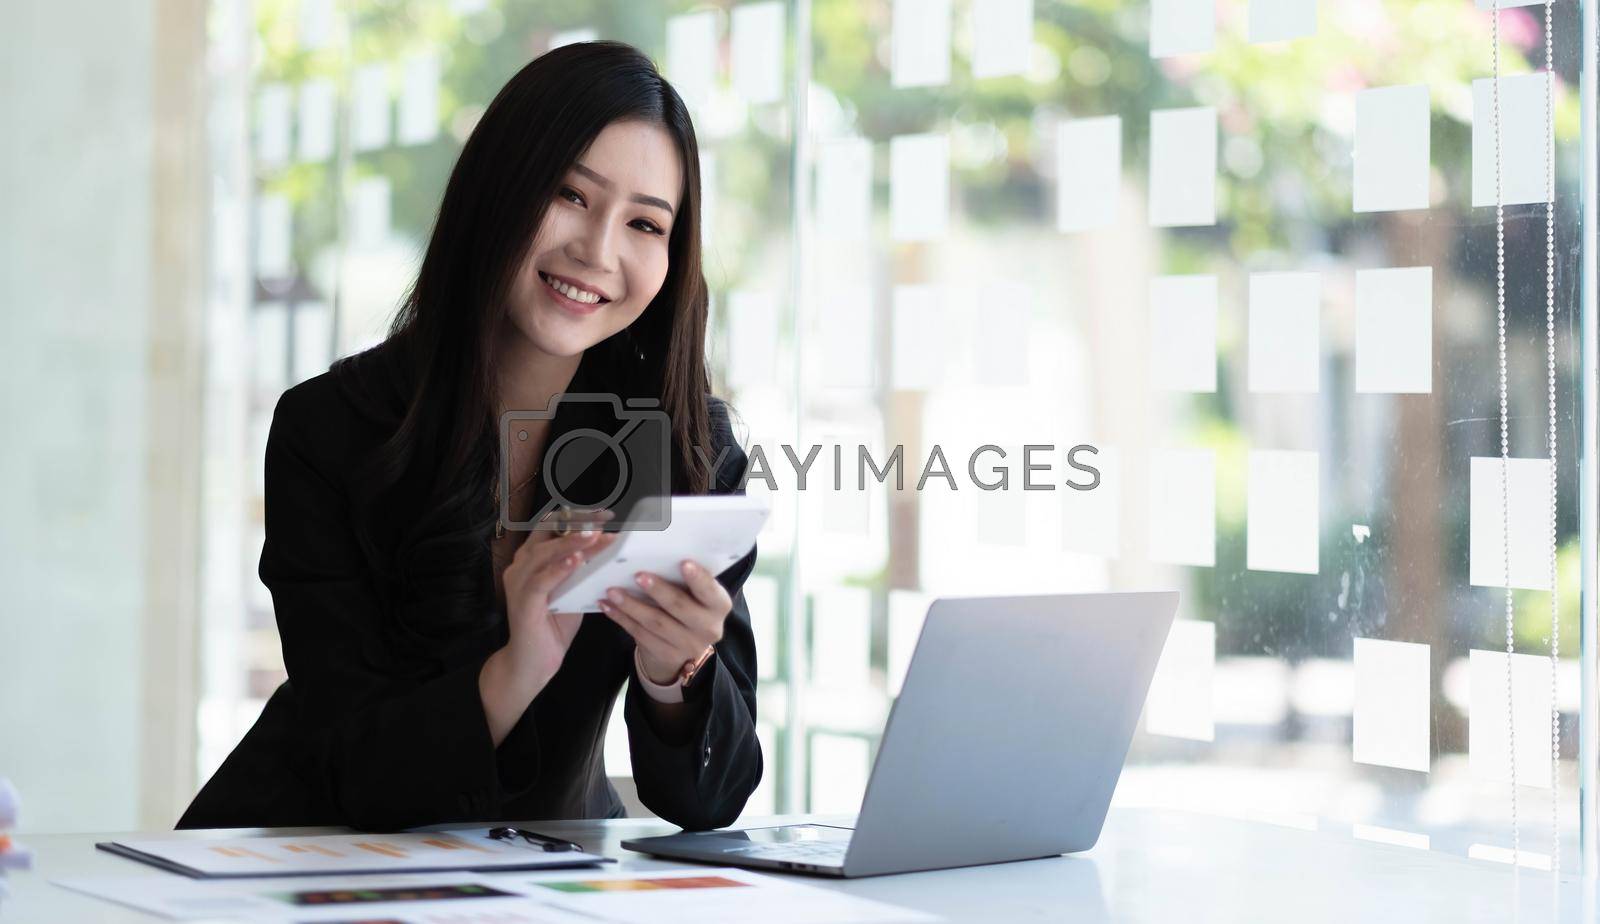 Businesswoman hands hold calculator with financial statistic stock photo,discussion and report analysis data the charts and graphs. Finance concept.